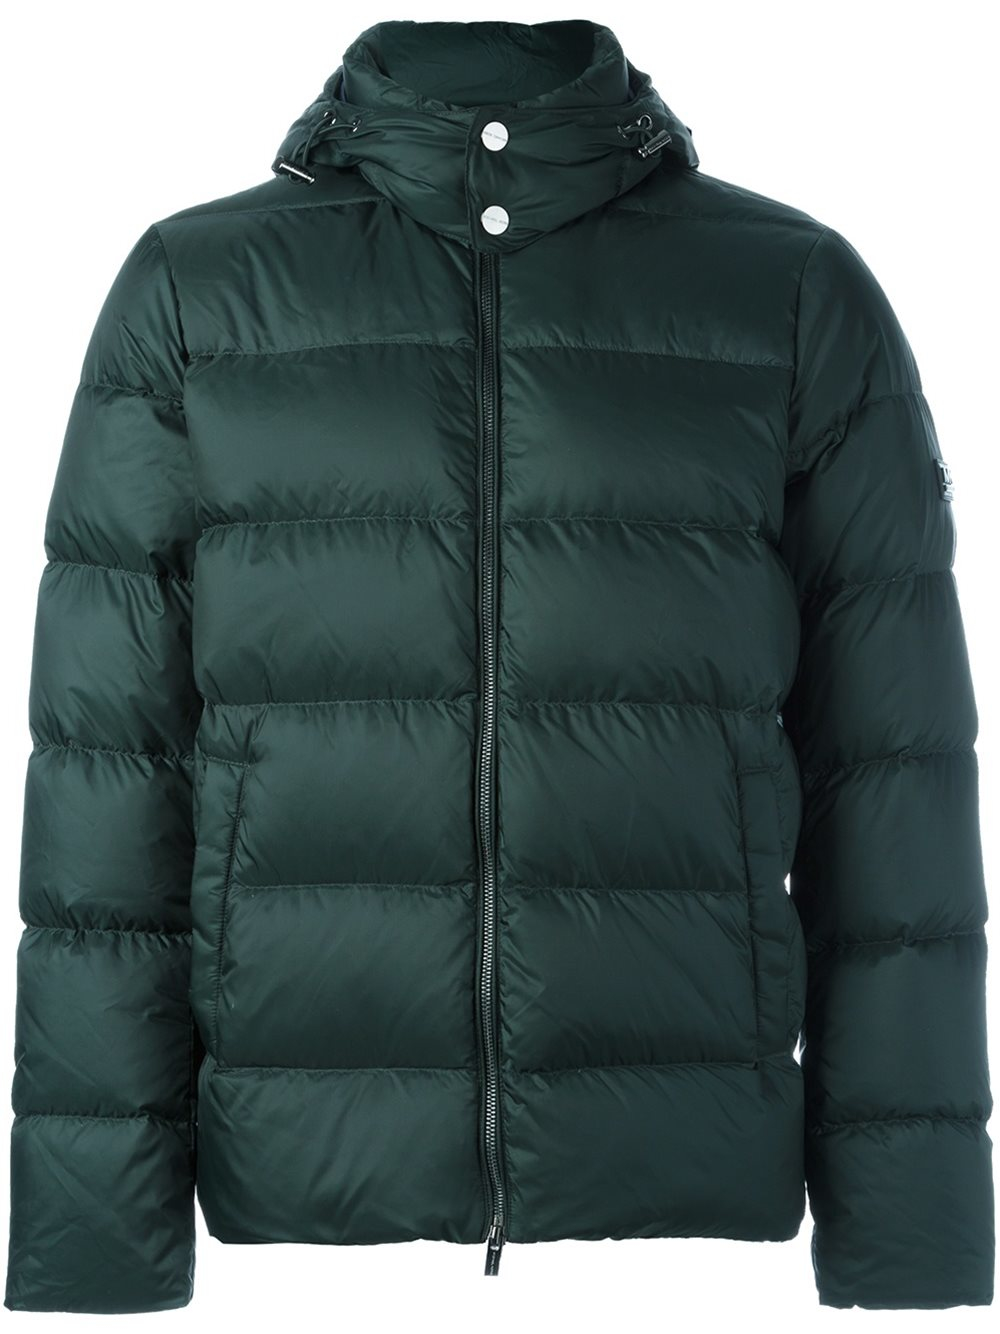 Michael Kors Synthetic Hooded Puffer Jacket in Green for Men - Lyst